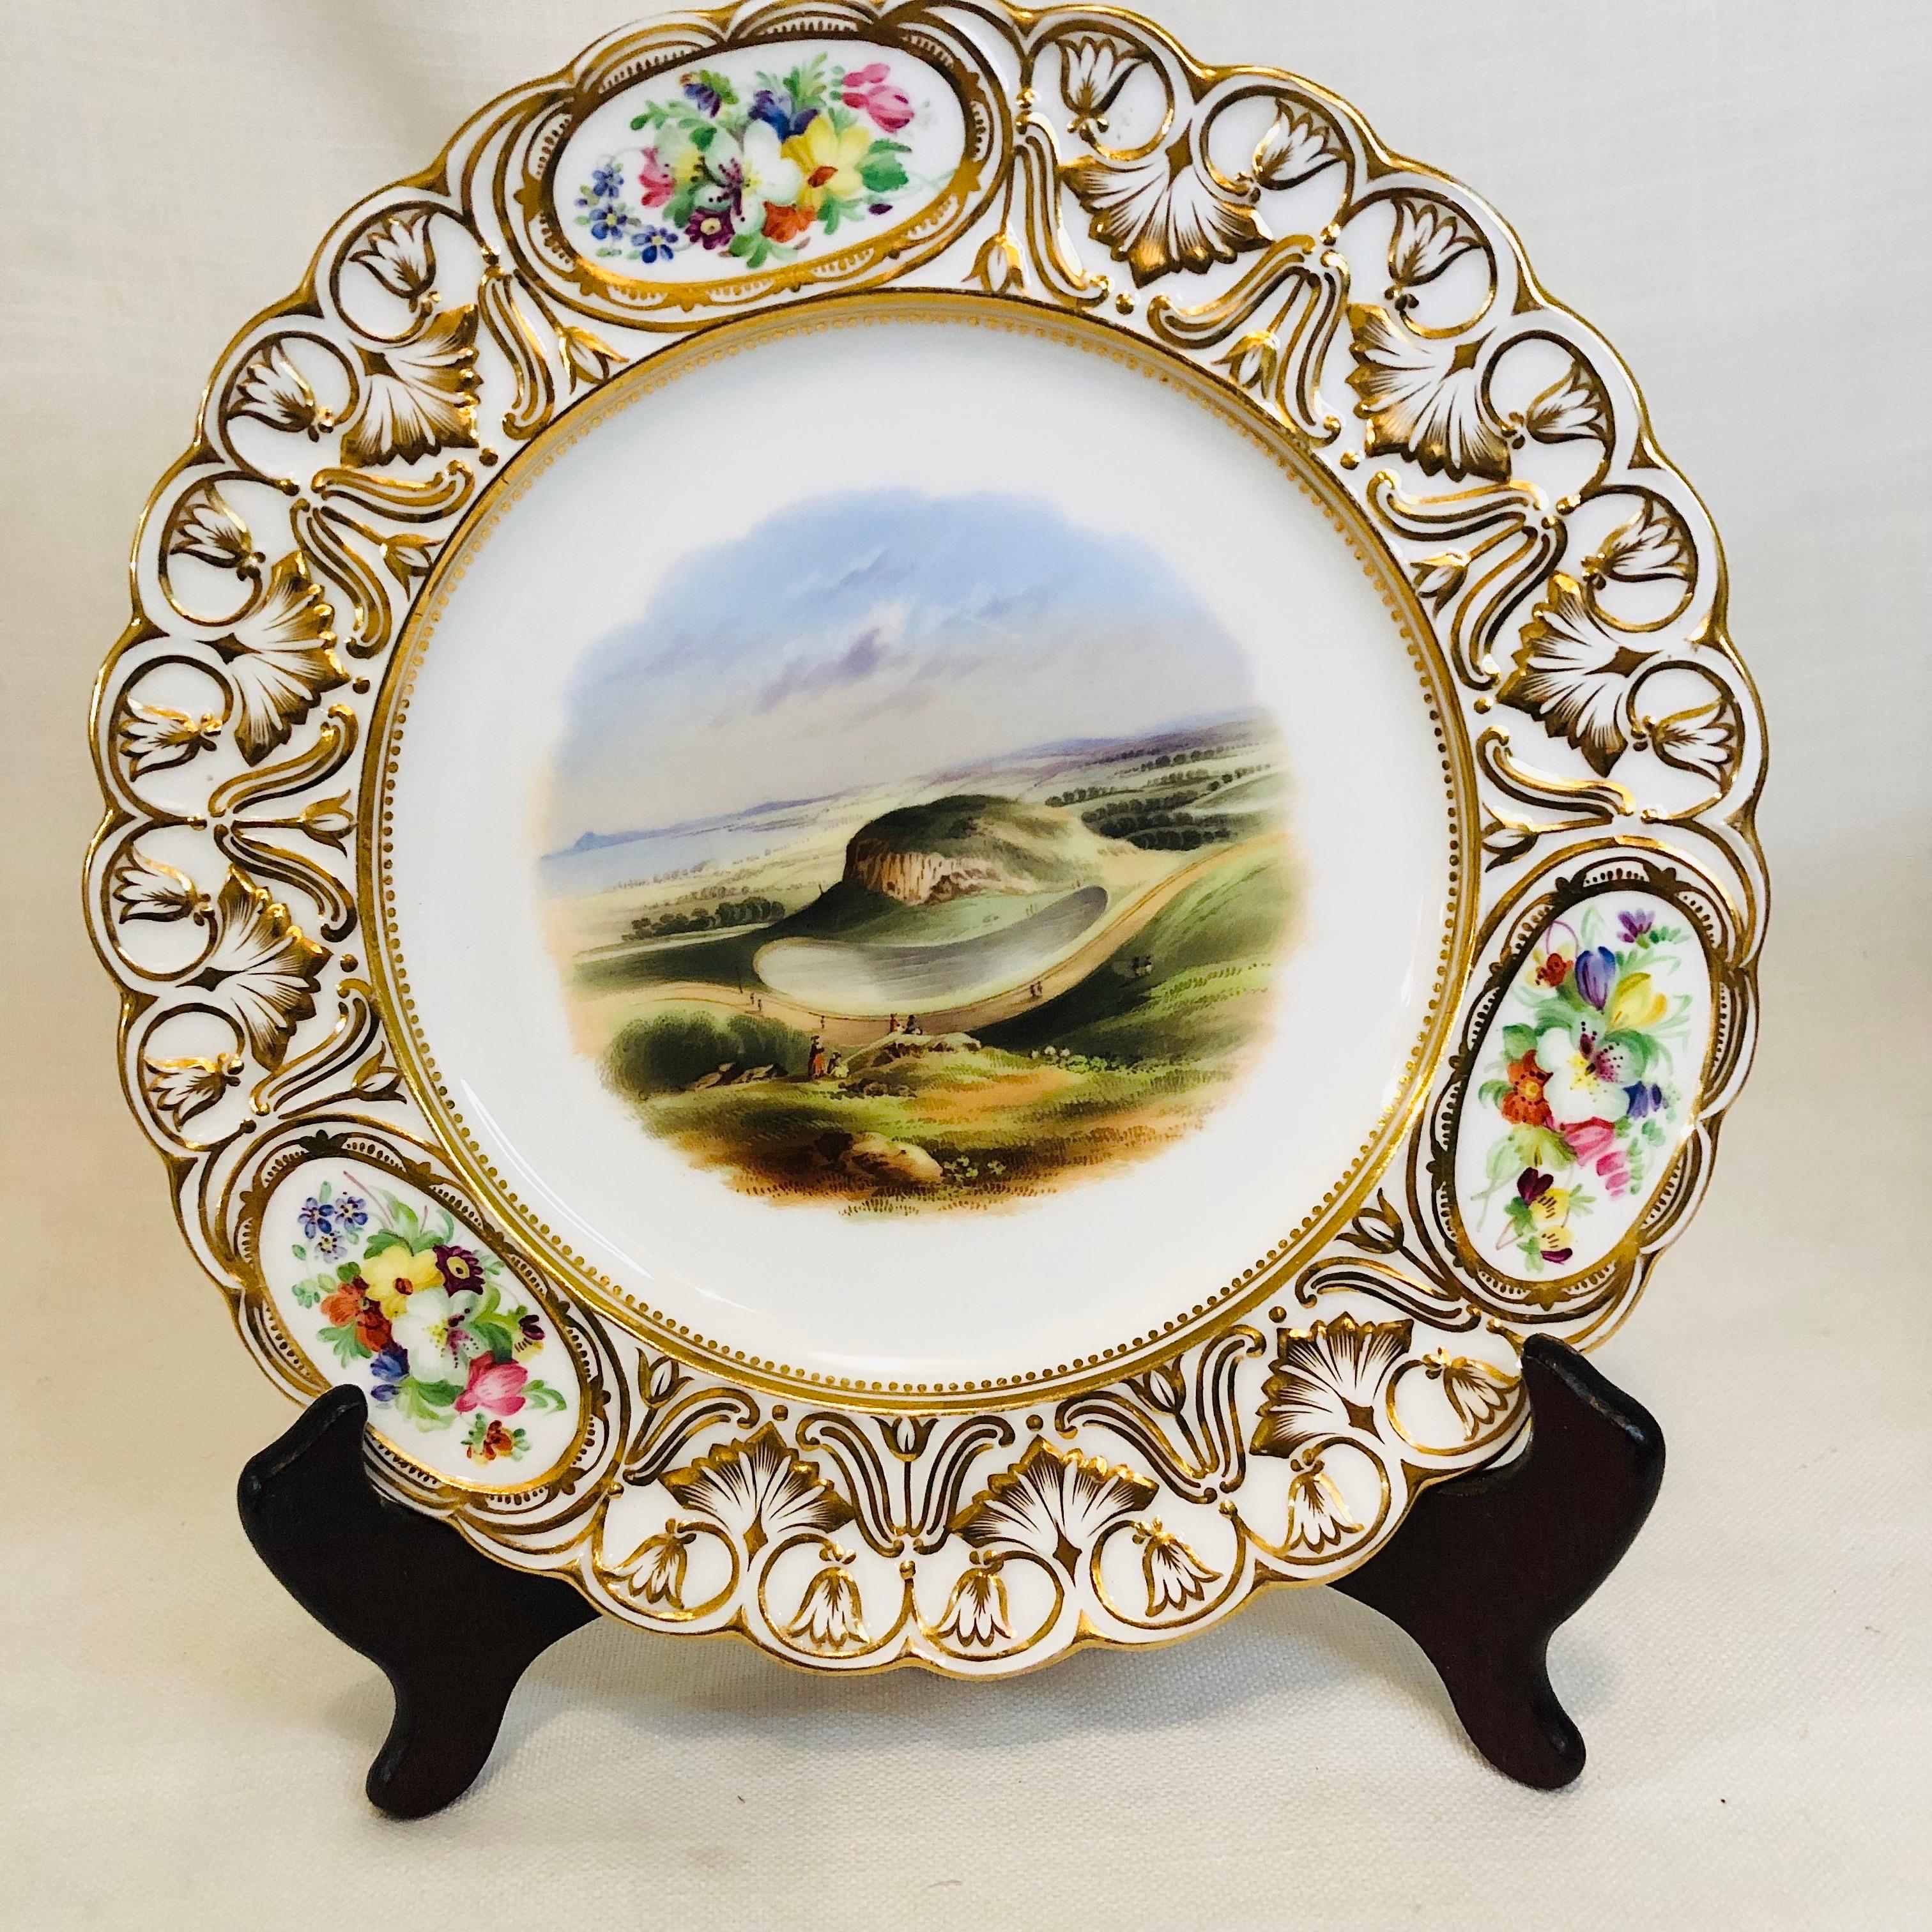 Set of 16 19th Century Coalport Plates Each Hand-Painted with Magnificent Scenes For Sale 12